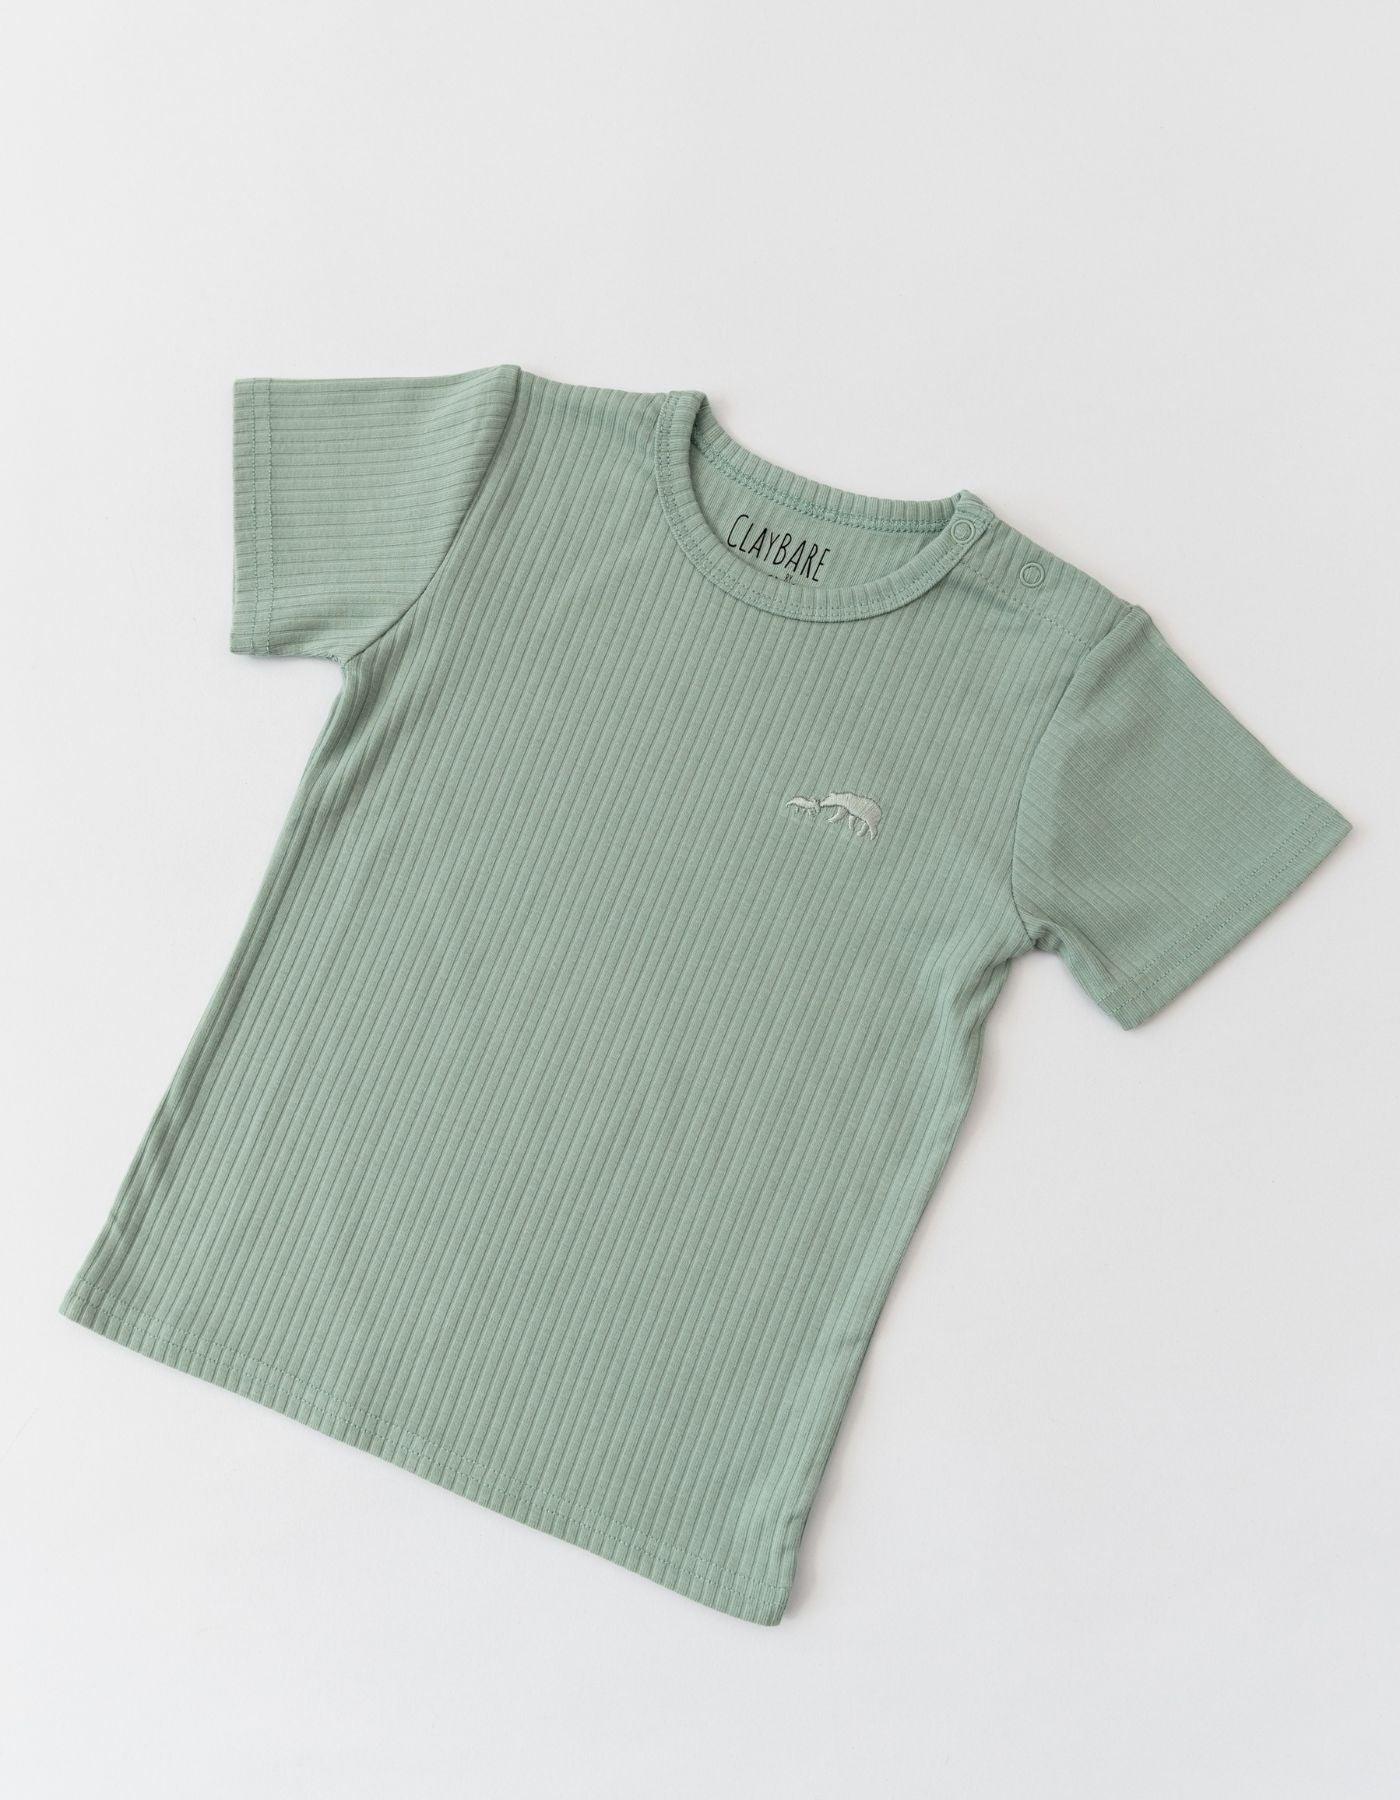 files/mint-ribbed-short-sleeve-top-claybearofficial-4.jpg